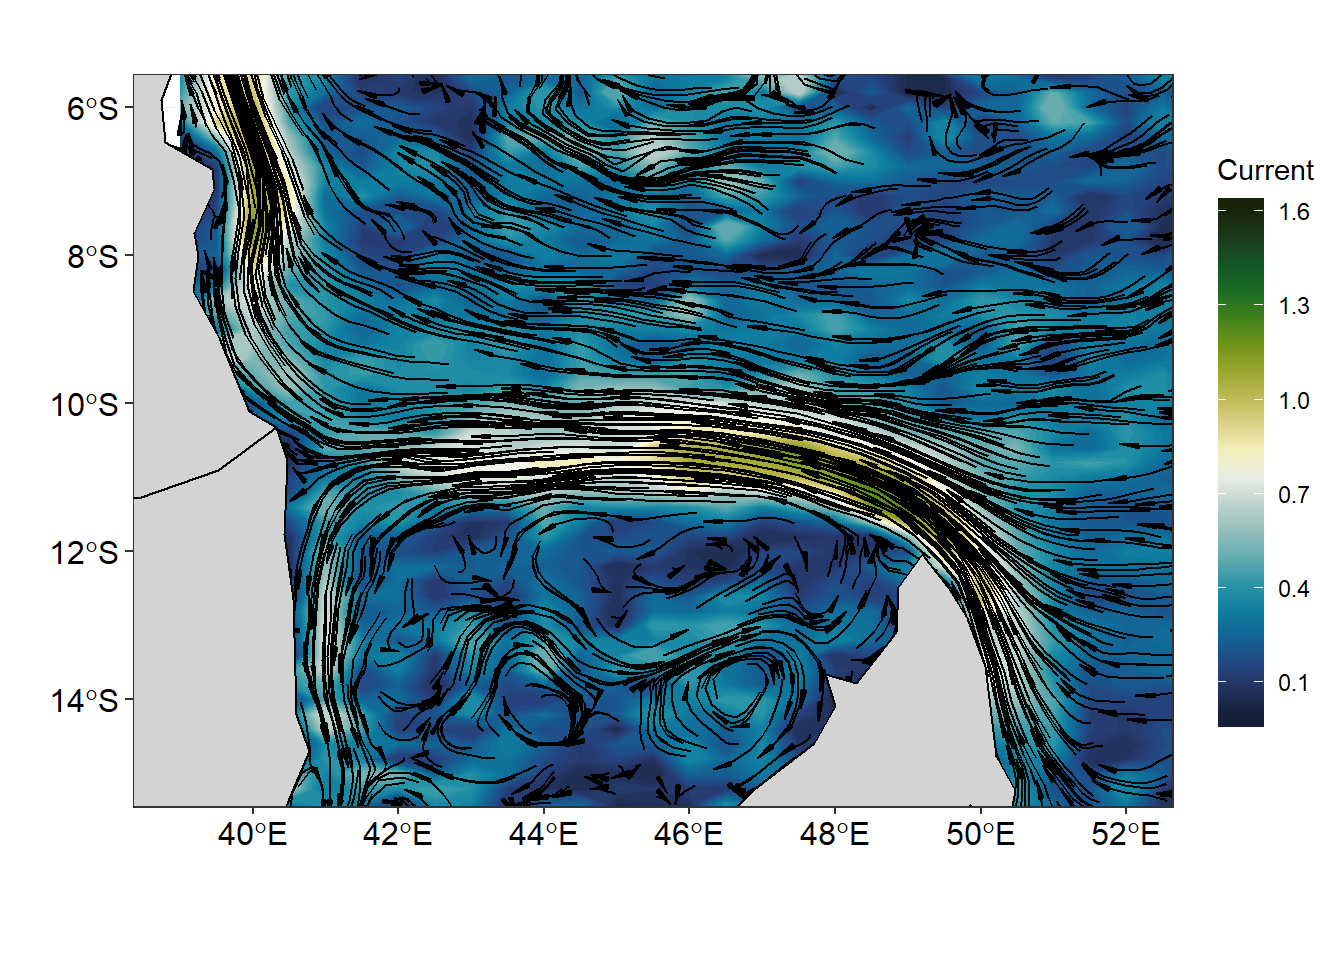 Streamline showing the flow of surface current superimposed on the current velocity